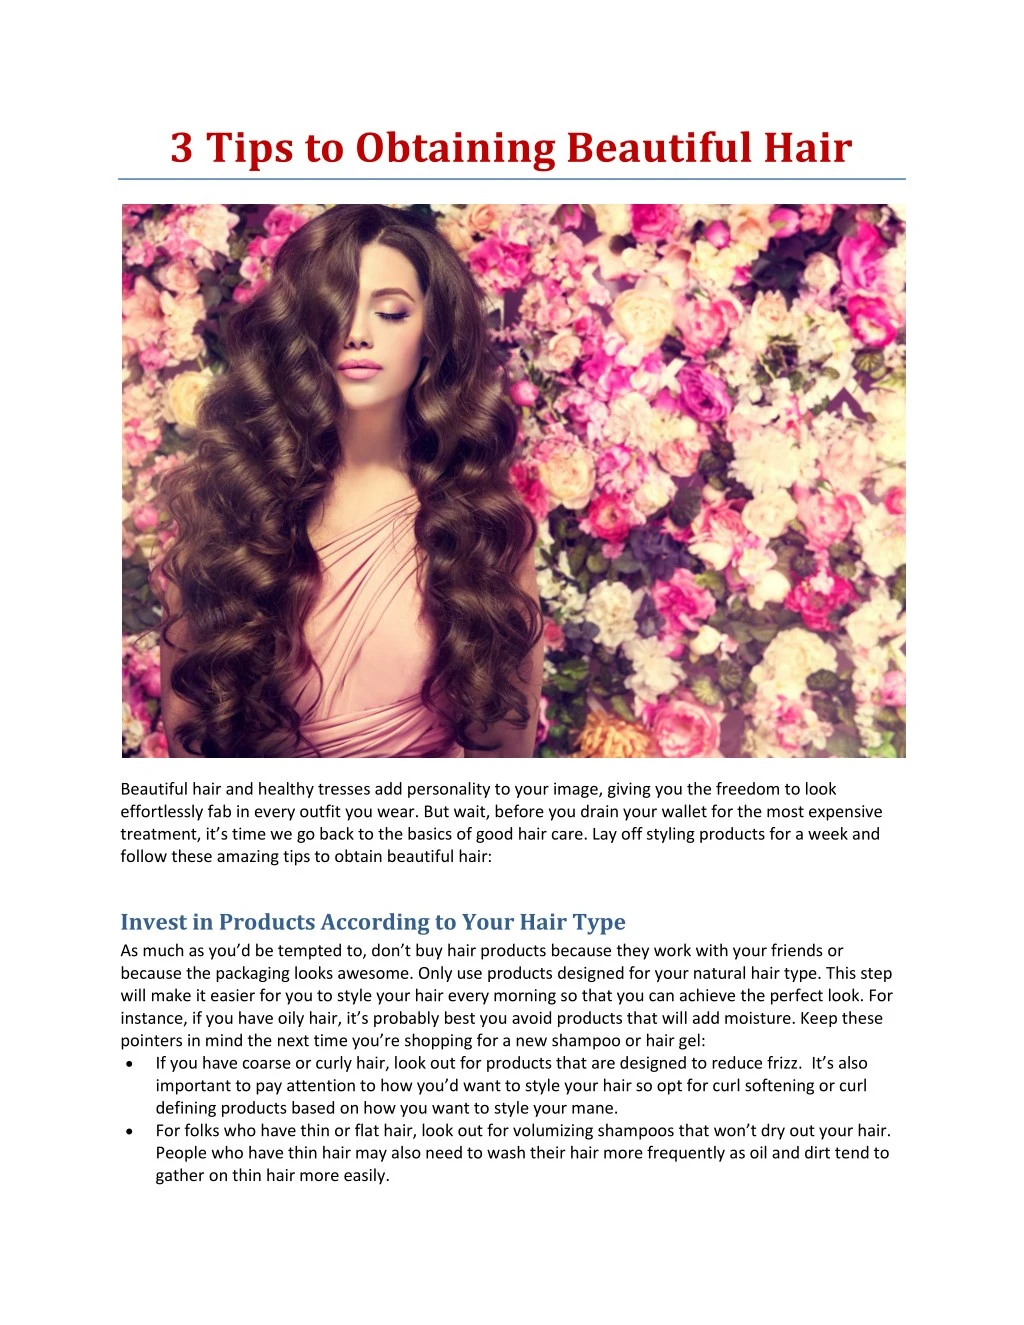 3 tips to obtaining beautiful hair